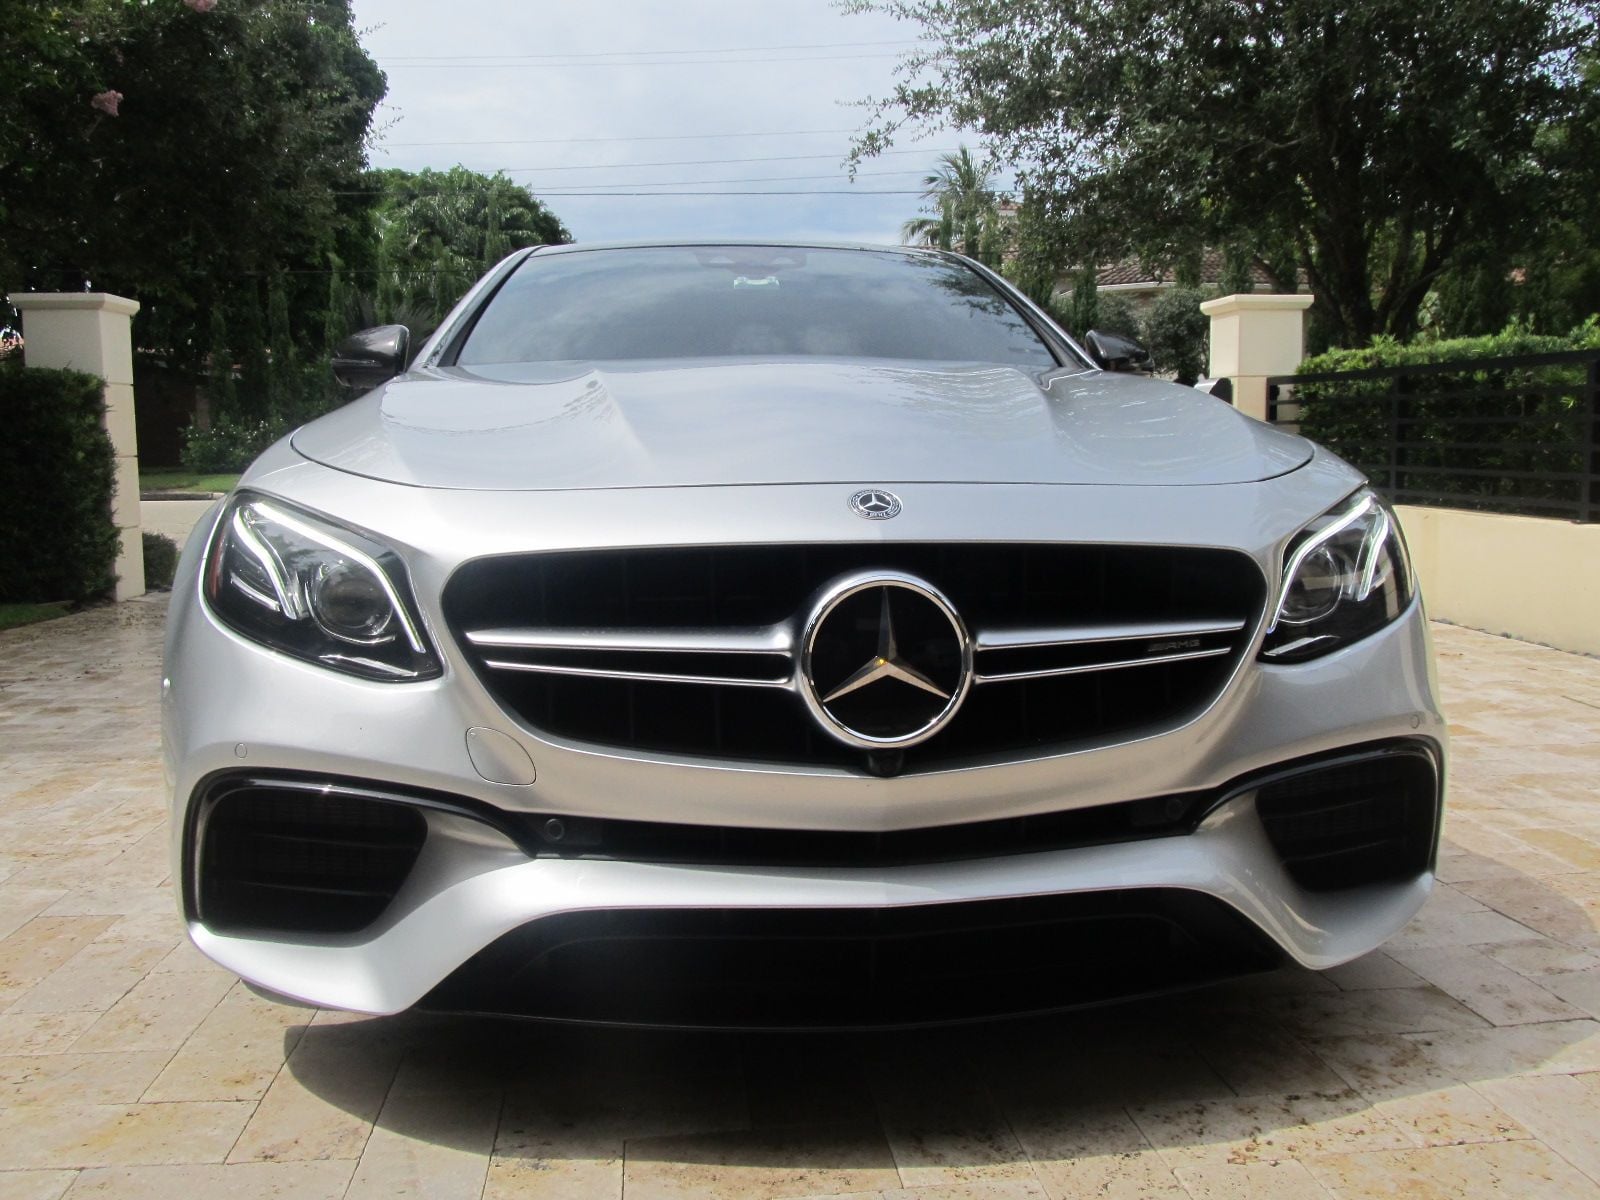 2019 Mercedes-Benz E63 AMG S - 2019 E63S Loaded, LOW Miles, Renntech, Extended Warranty, Maintenance Included!! - Used - VIN WDDZF8KB5KA575491 - 5,273 Miles - 8 cyl - AWD - Automatic - Sedan - Silver - Fort Lauderdale, FL 33304, United States